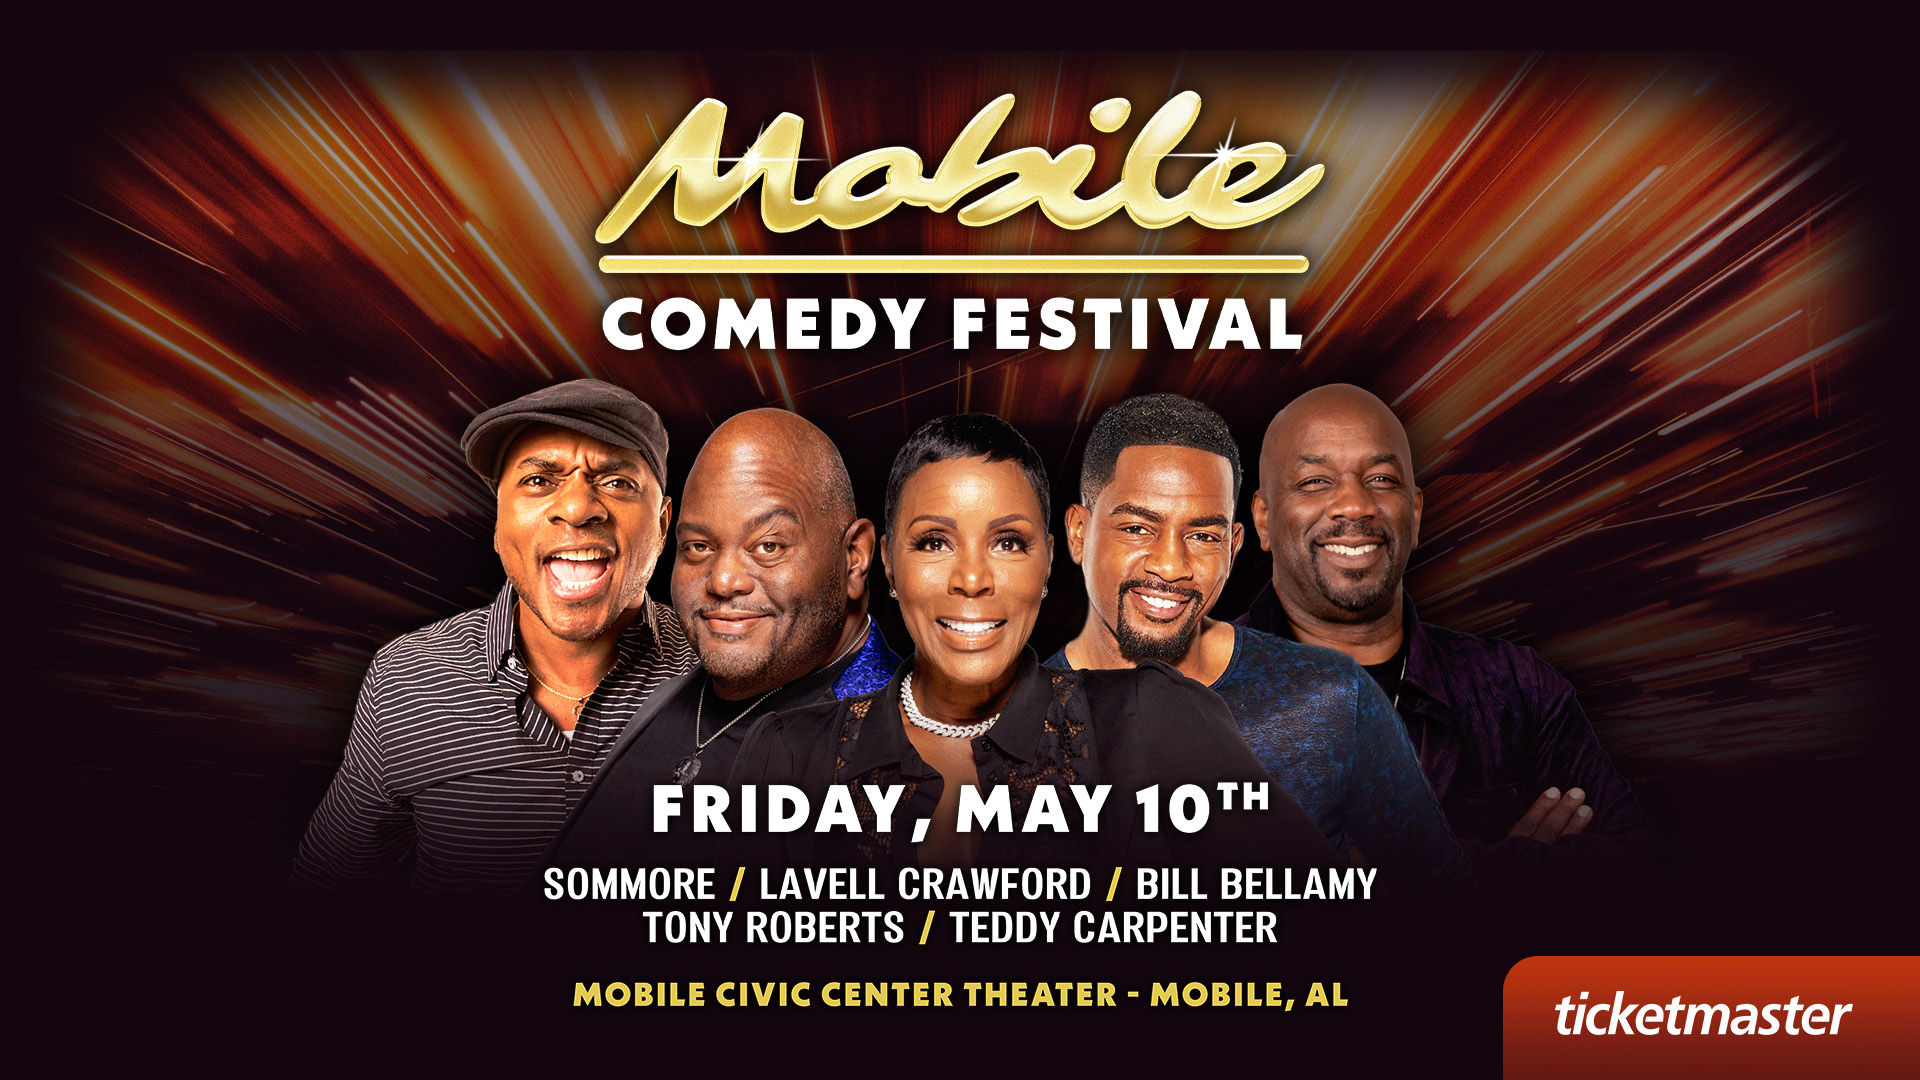 Mobile Civic Center on X: ON SALE NOW! GCC HBCU Fest with the